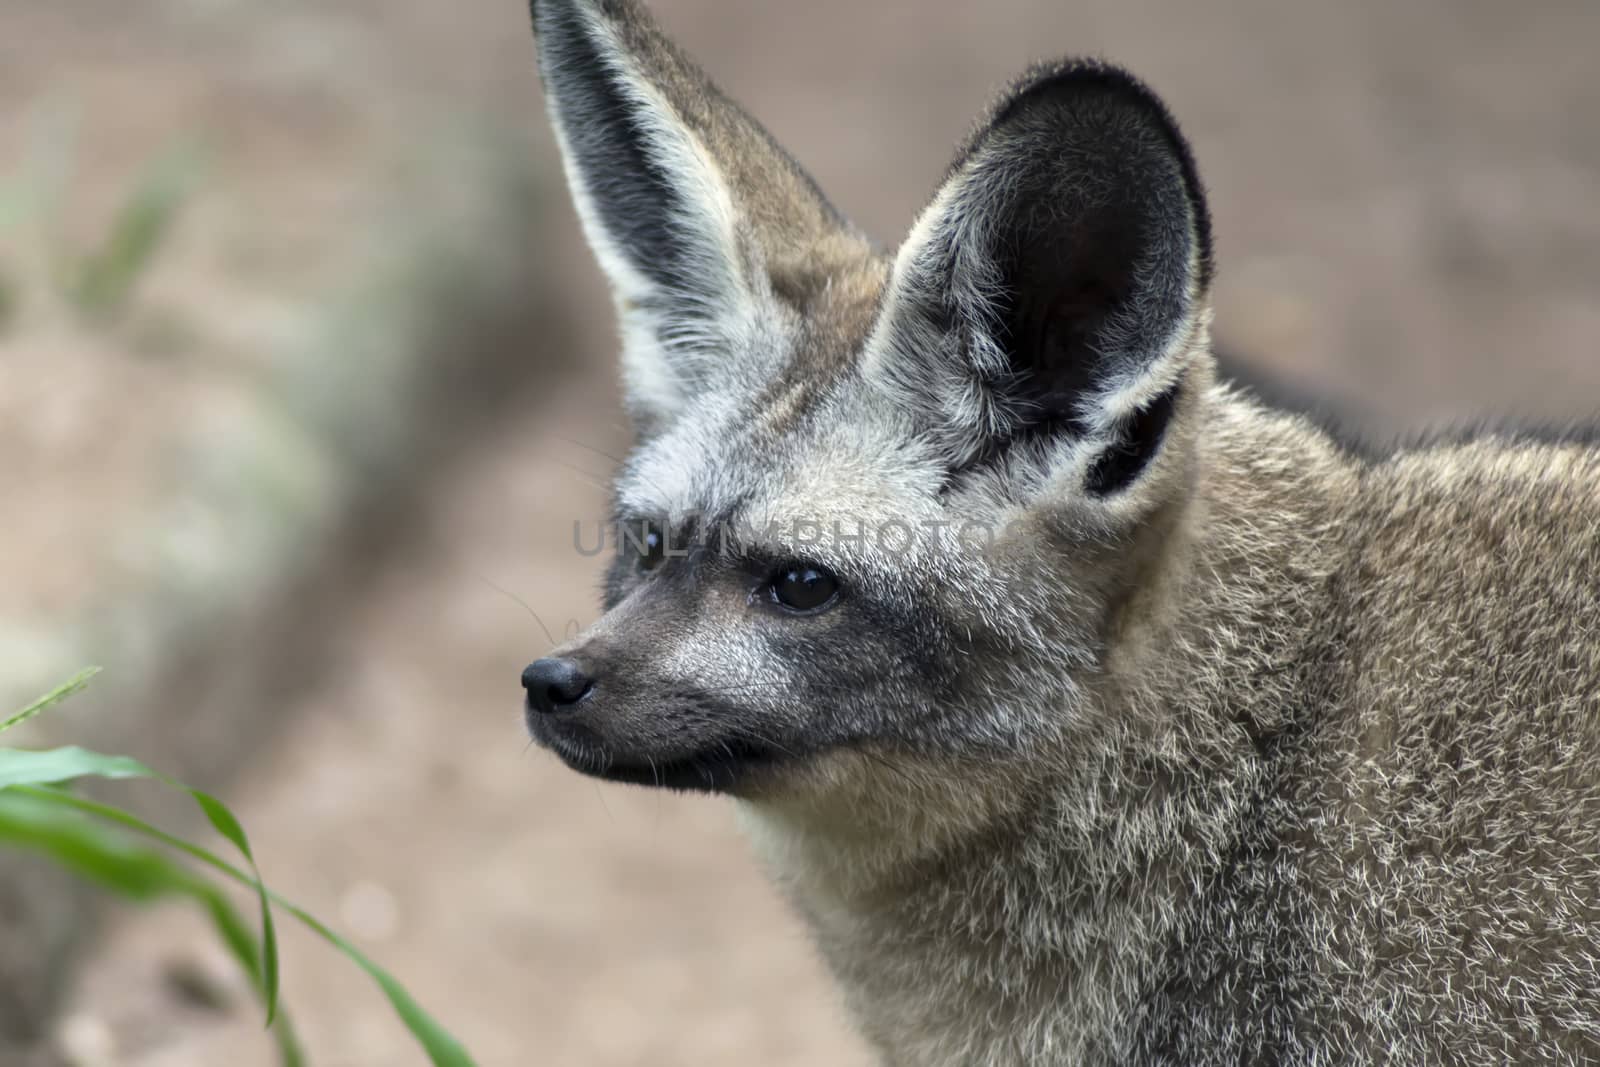 Bat-eared fox, Otocyon megalotis is a canid of the African savanna, named for its large ears